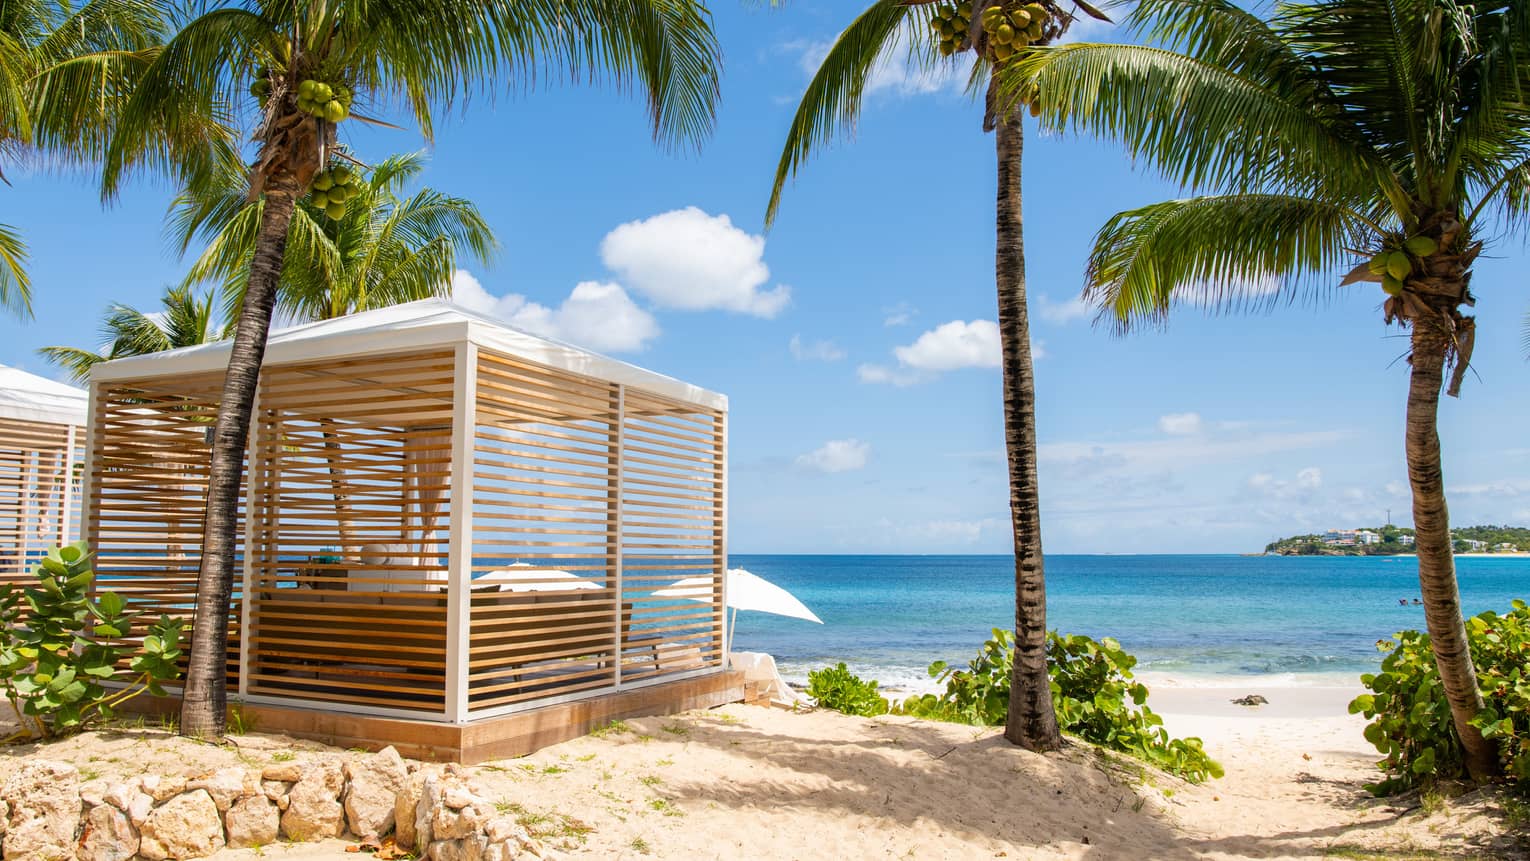 Beachfront cabana with slated wood walls and a white canopy set on the sand next to three palm trees with the ocean in the near distance